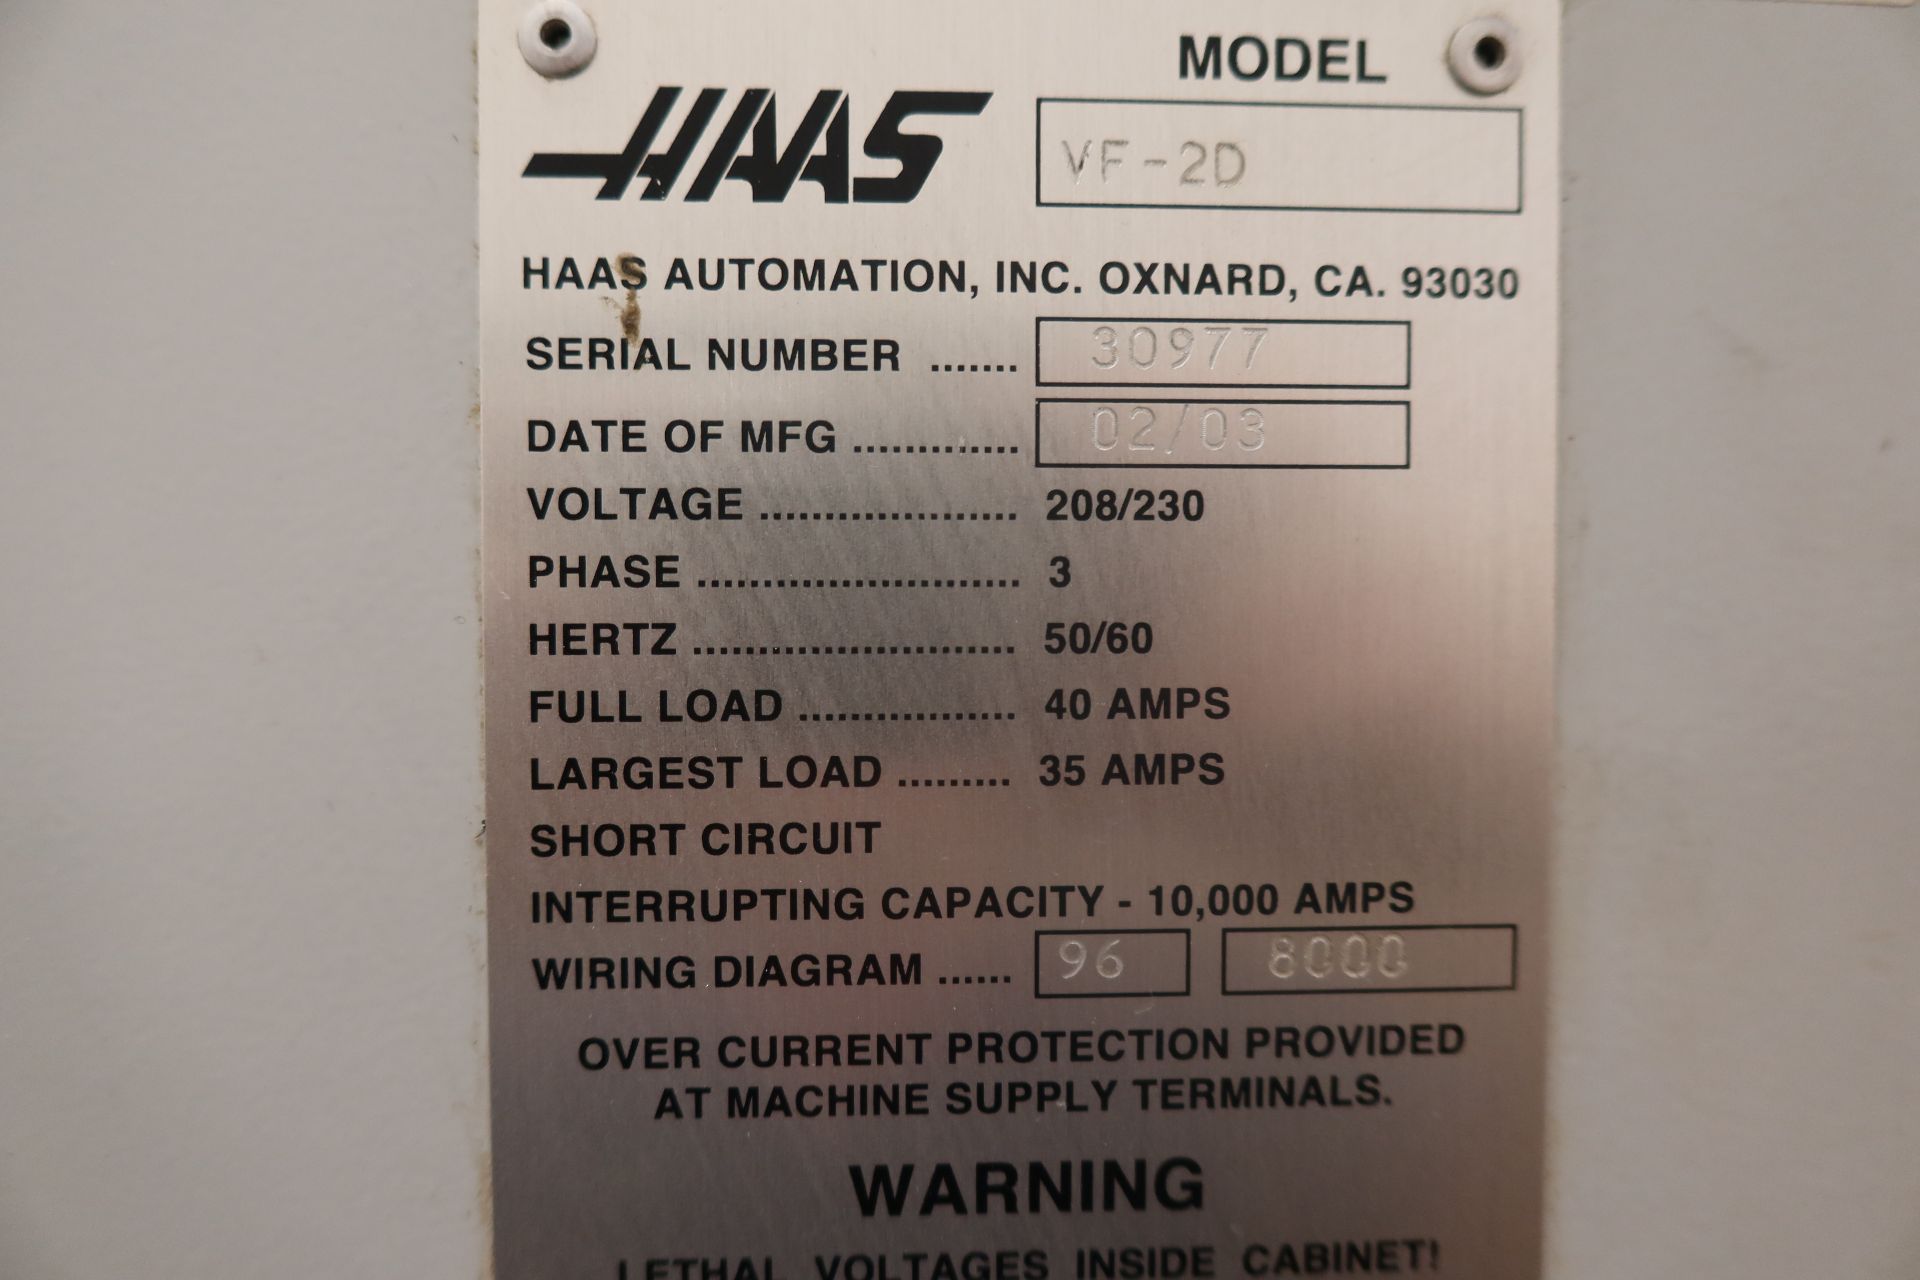 Haas VF-2D 5-Axis CNC Vertical Machining Center, SN 30977 - Image 10 of 10